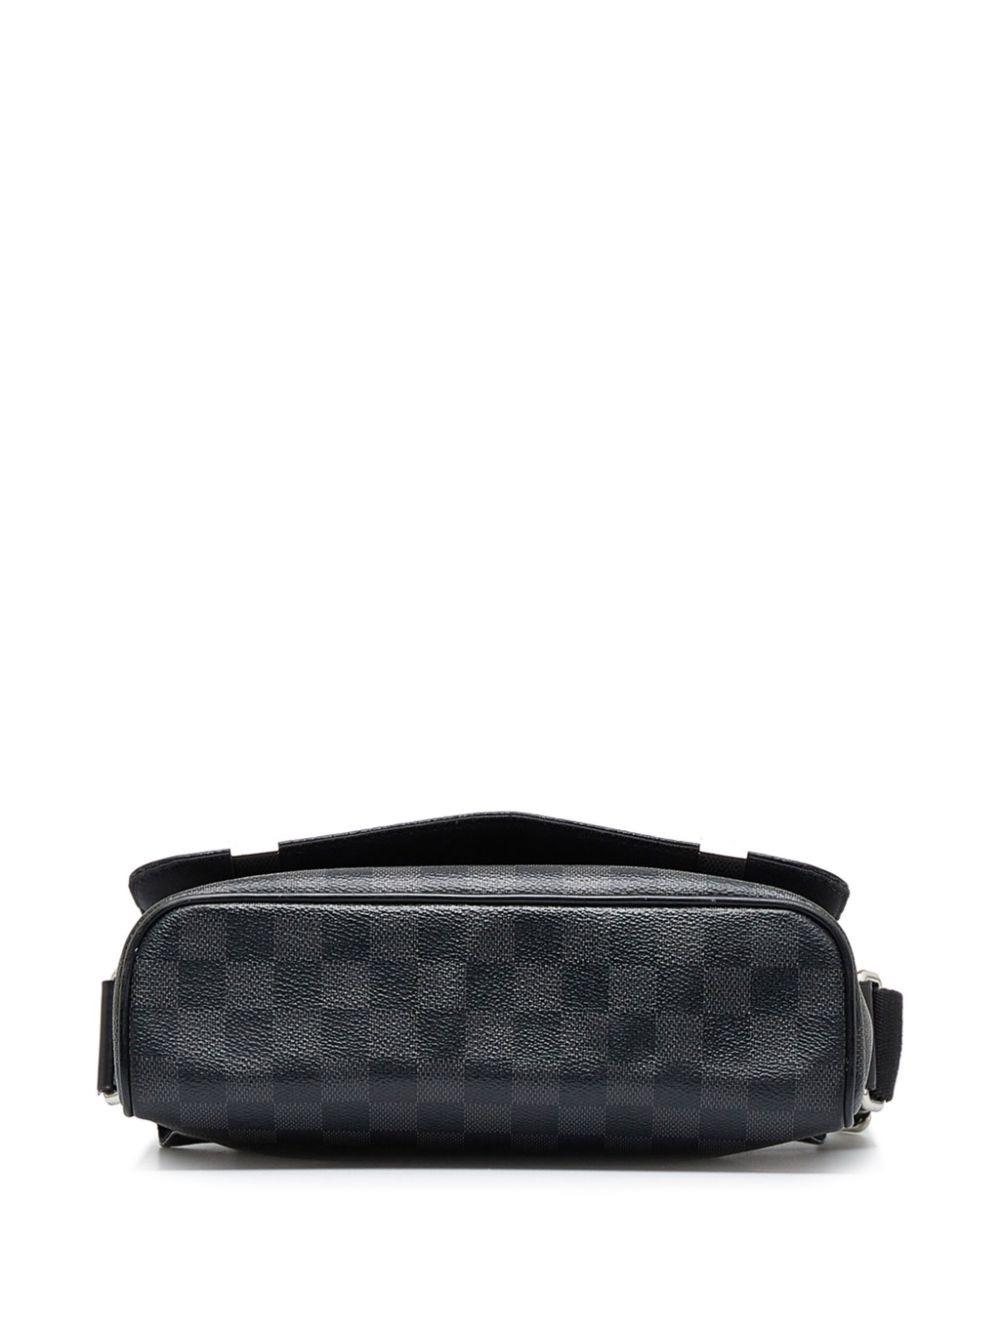 Pre-owned Louis Vuitton 2017 Damier Graphite District Pm In Black